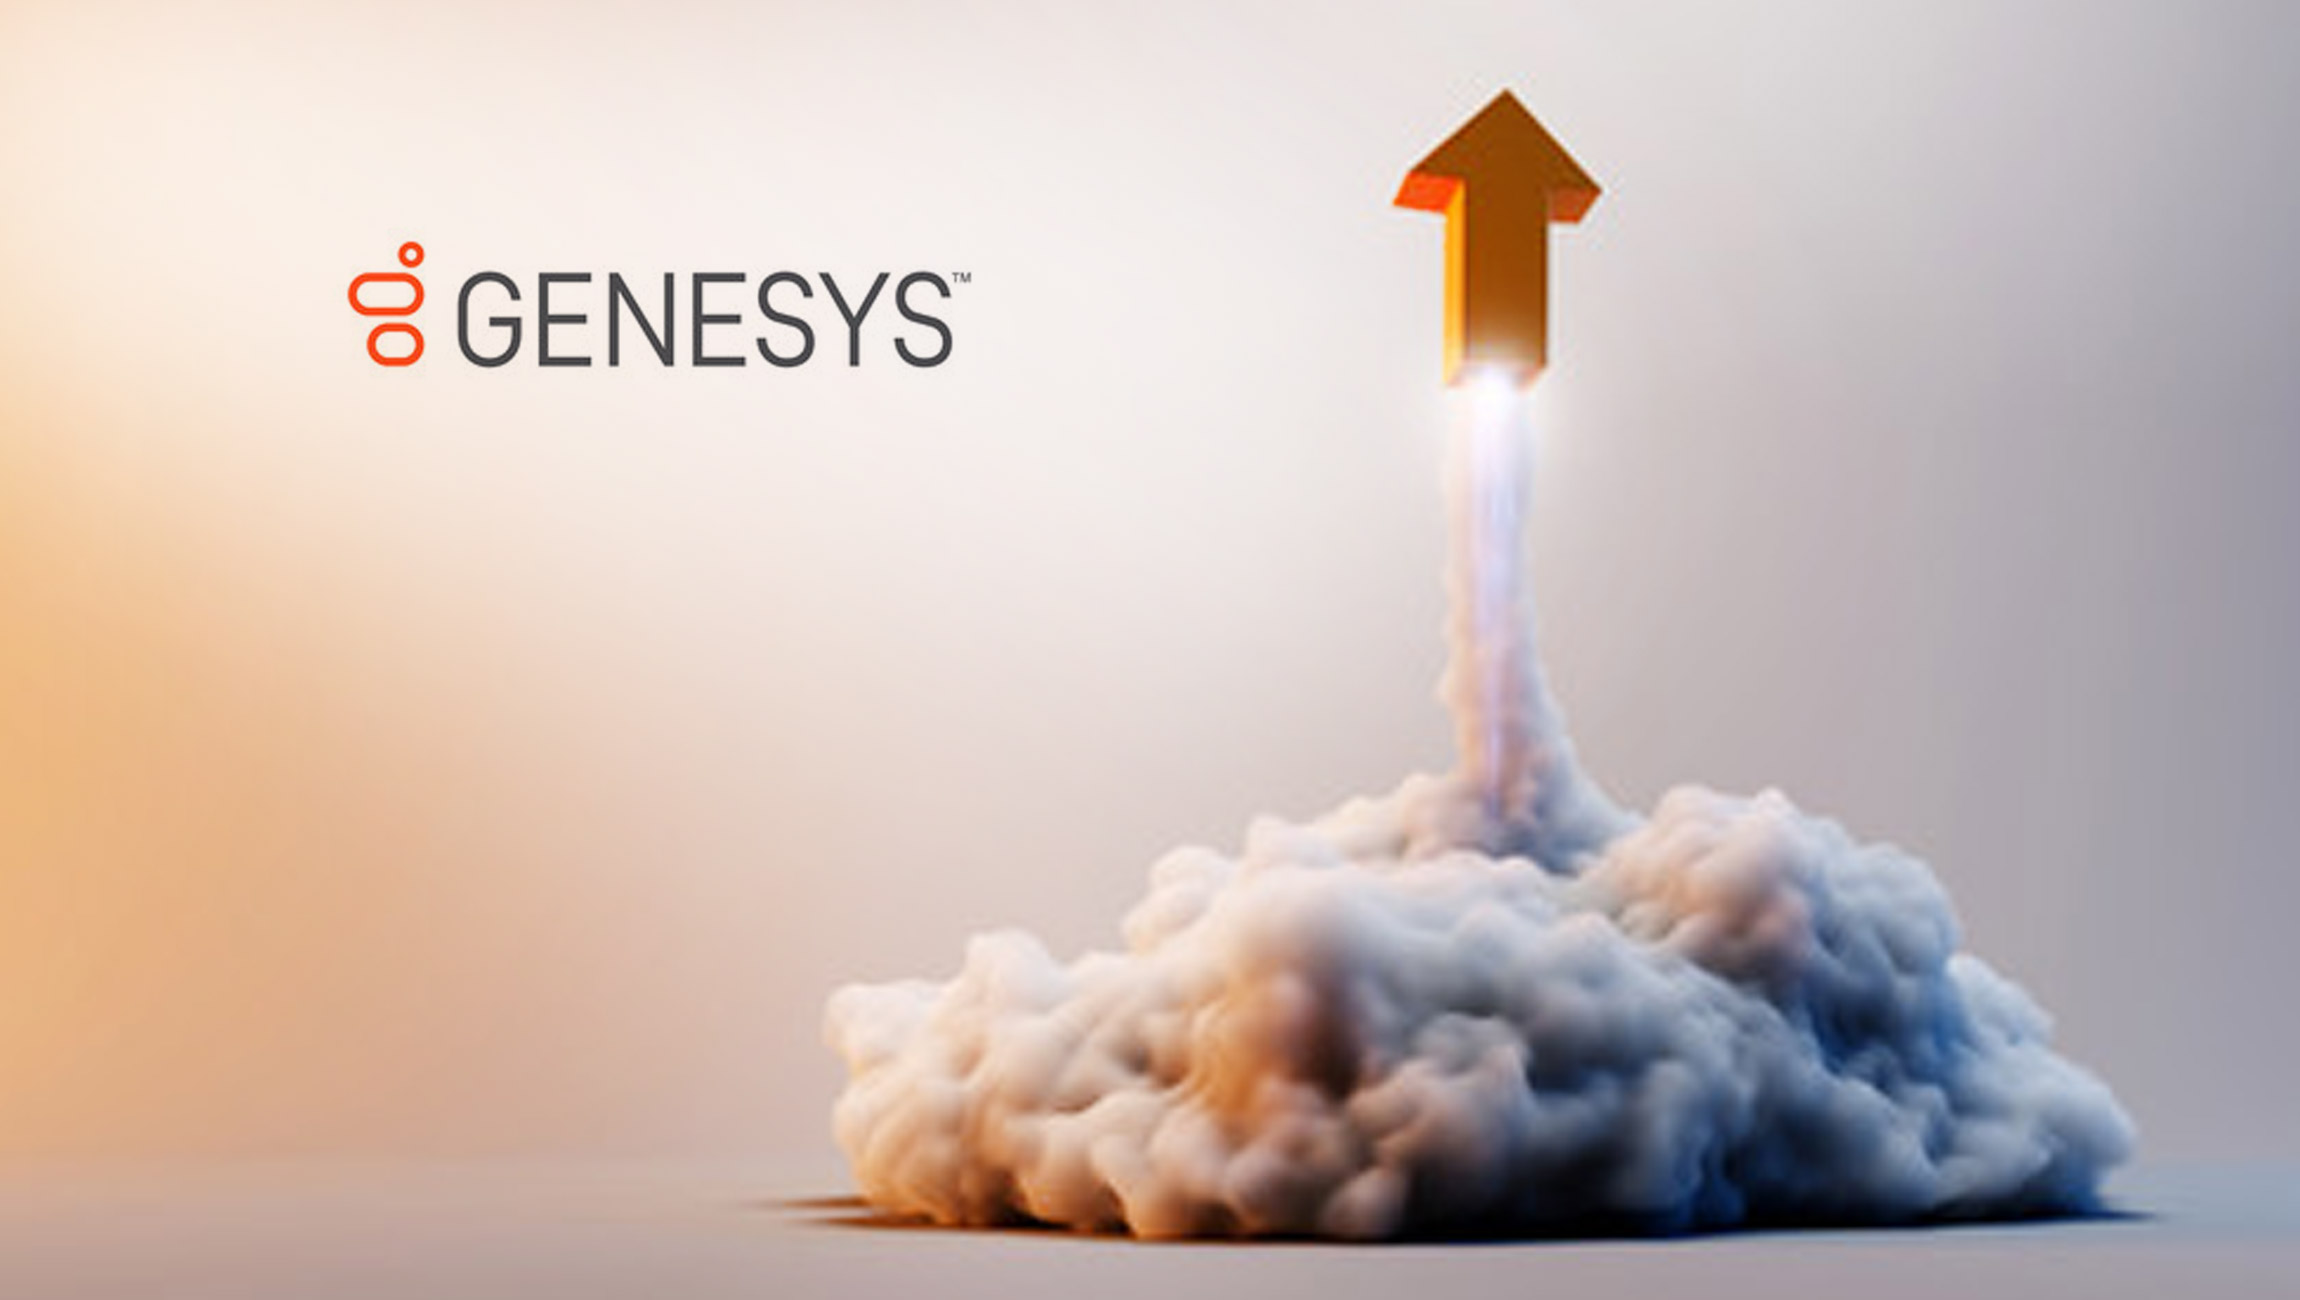 Genesys Launches Industry-First Automated Trial and Purchase Experience, Making Rapid CX Innovation Simpler for Small- to Mid-Sized Organizations